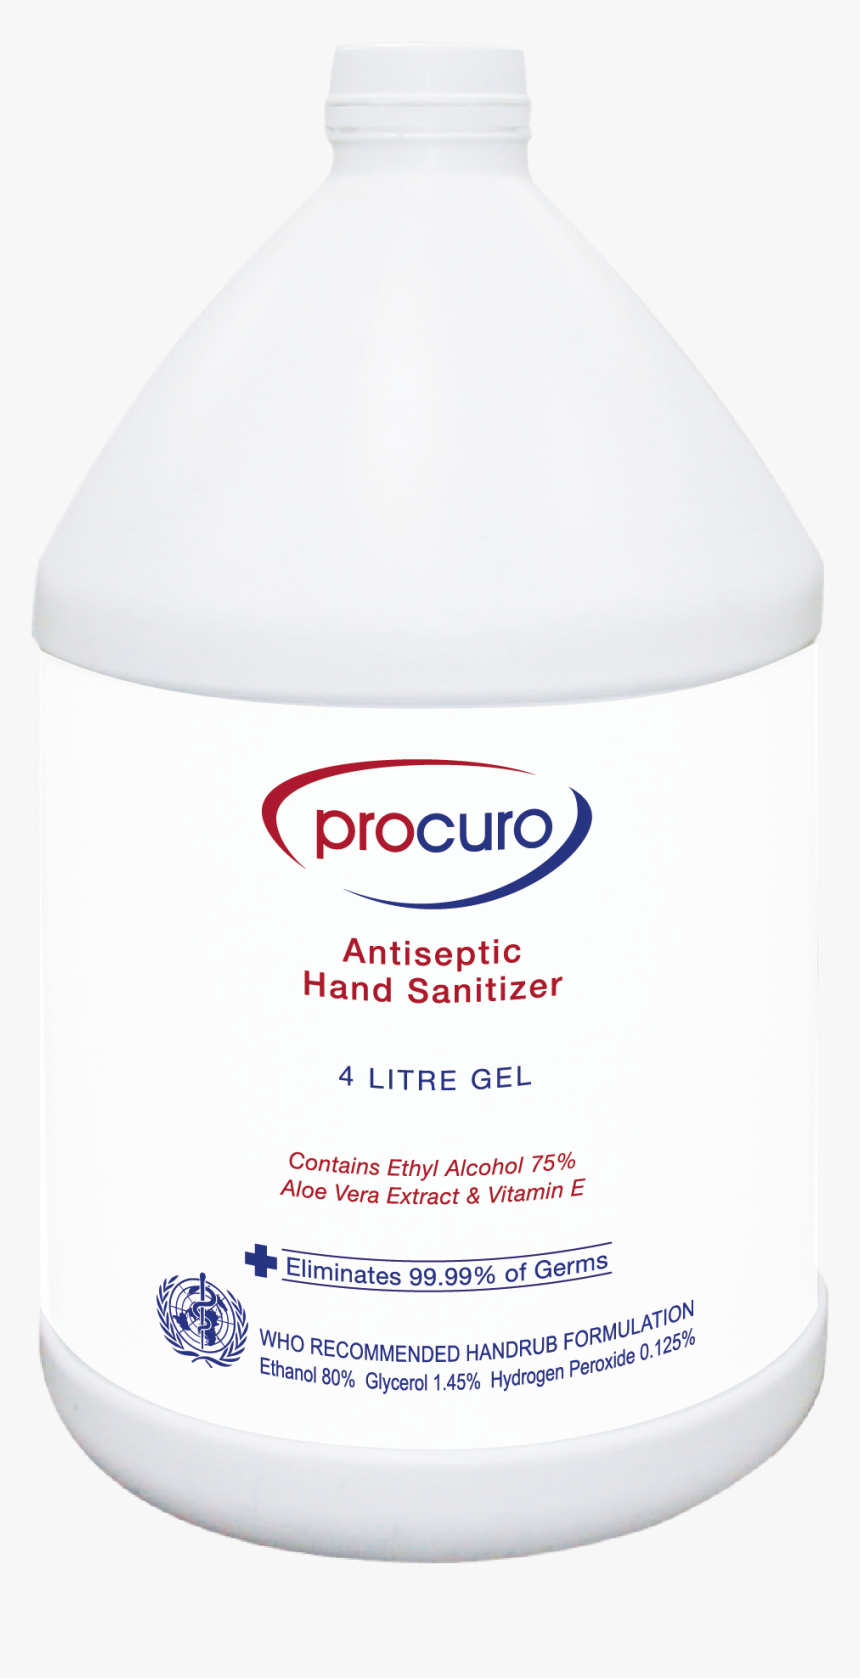 Antiseptic Hand Sanitizer 4litre Gel - Cosmetics, HD Png Download, Free Download